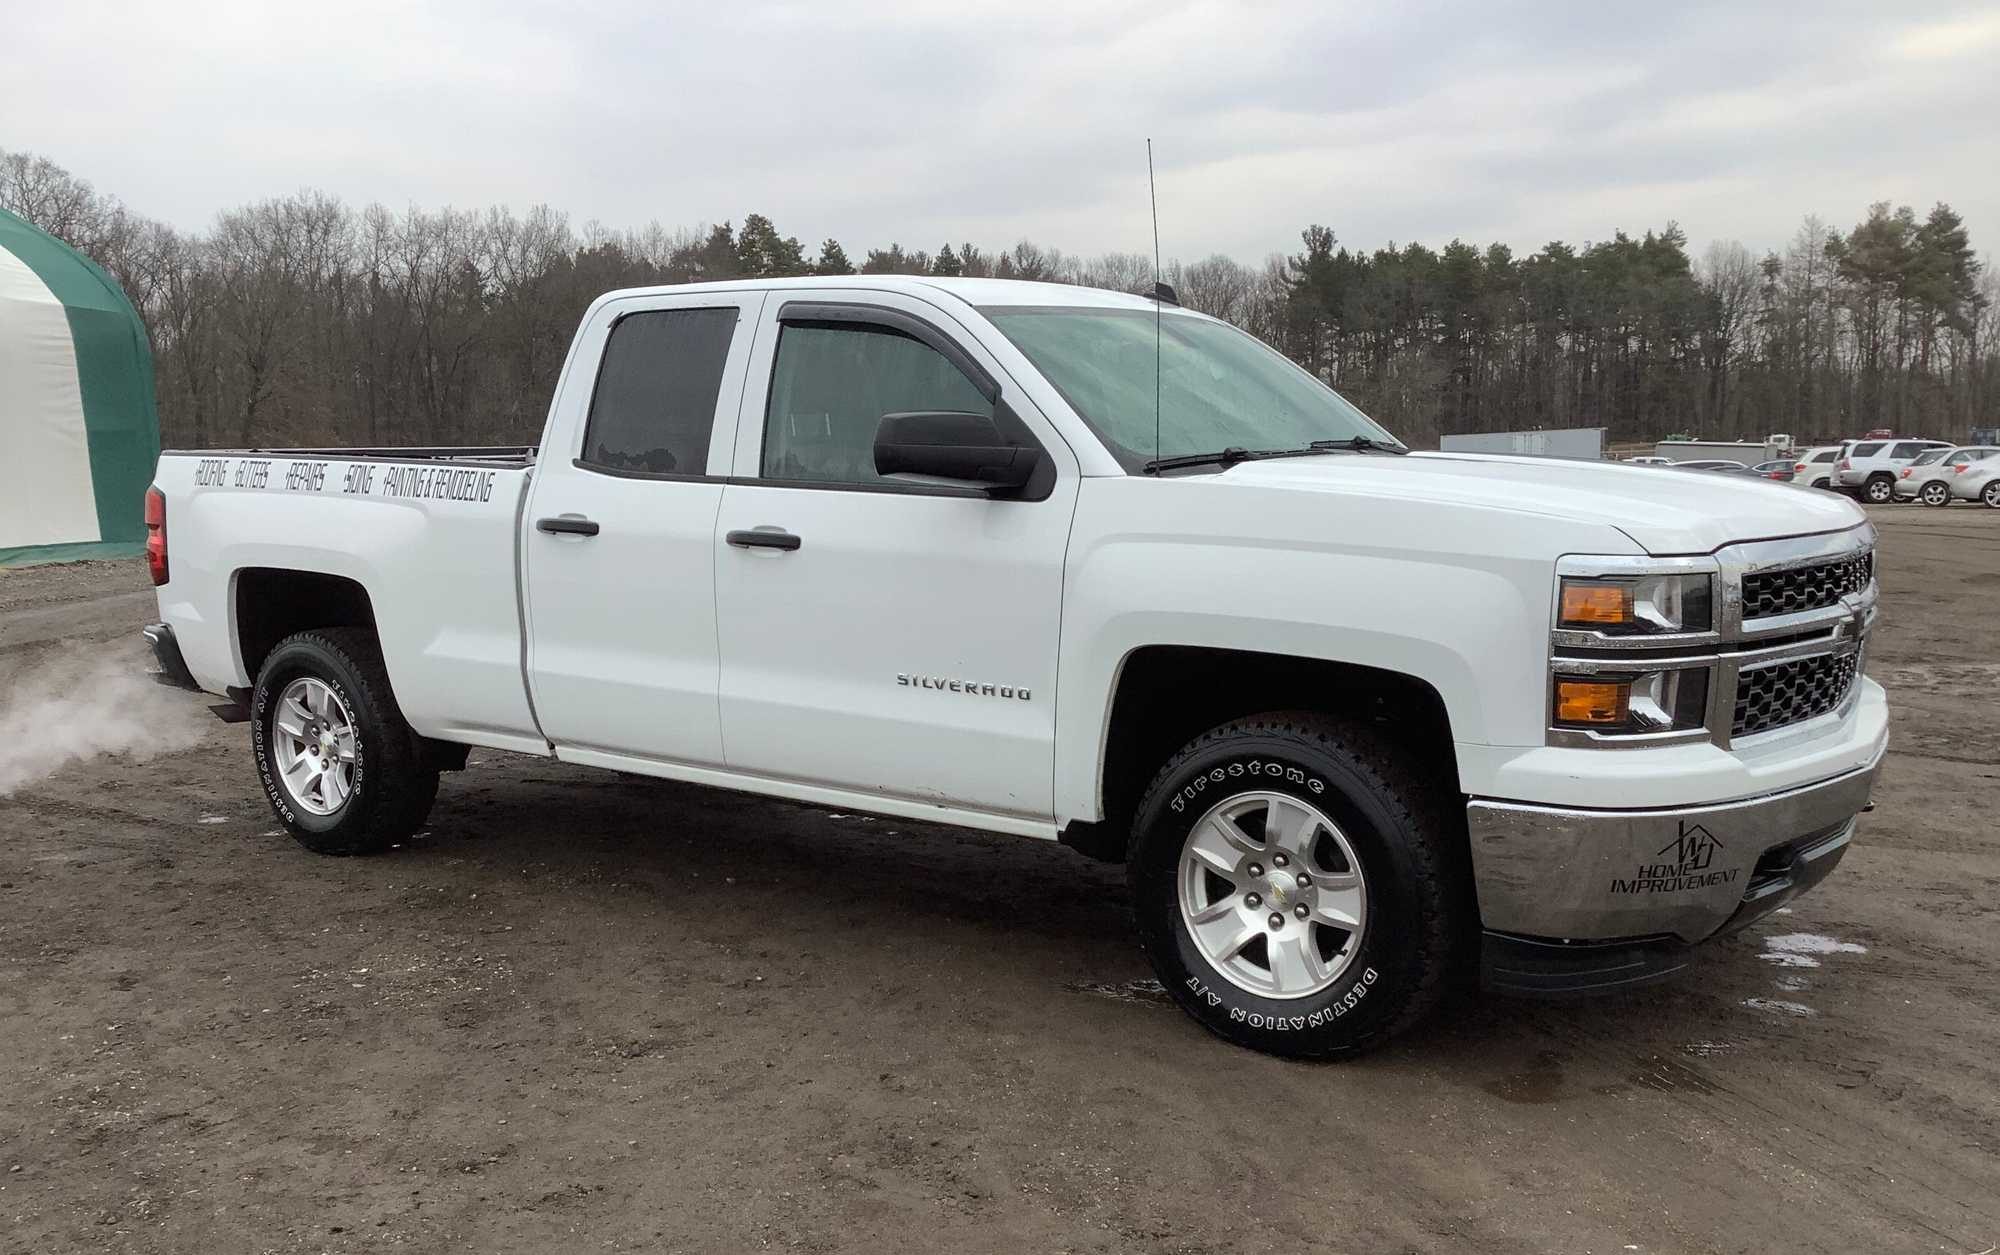 2014 Chevrolet Silverado LT Double Cab 4WD Extended Cab Pickup 4-DR